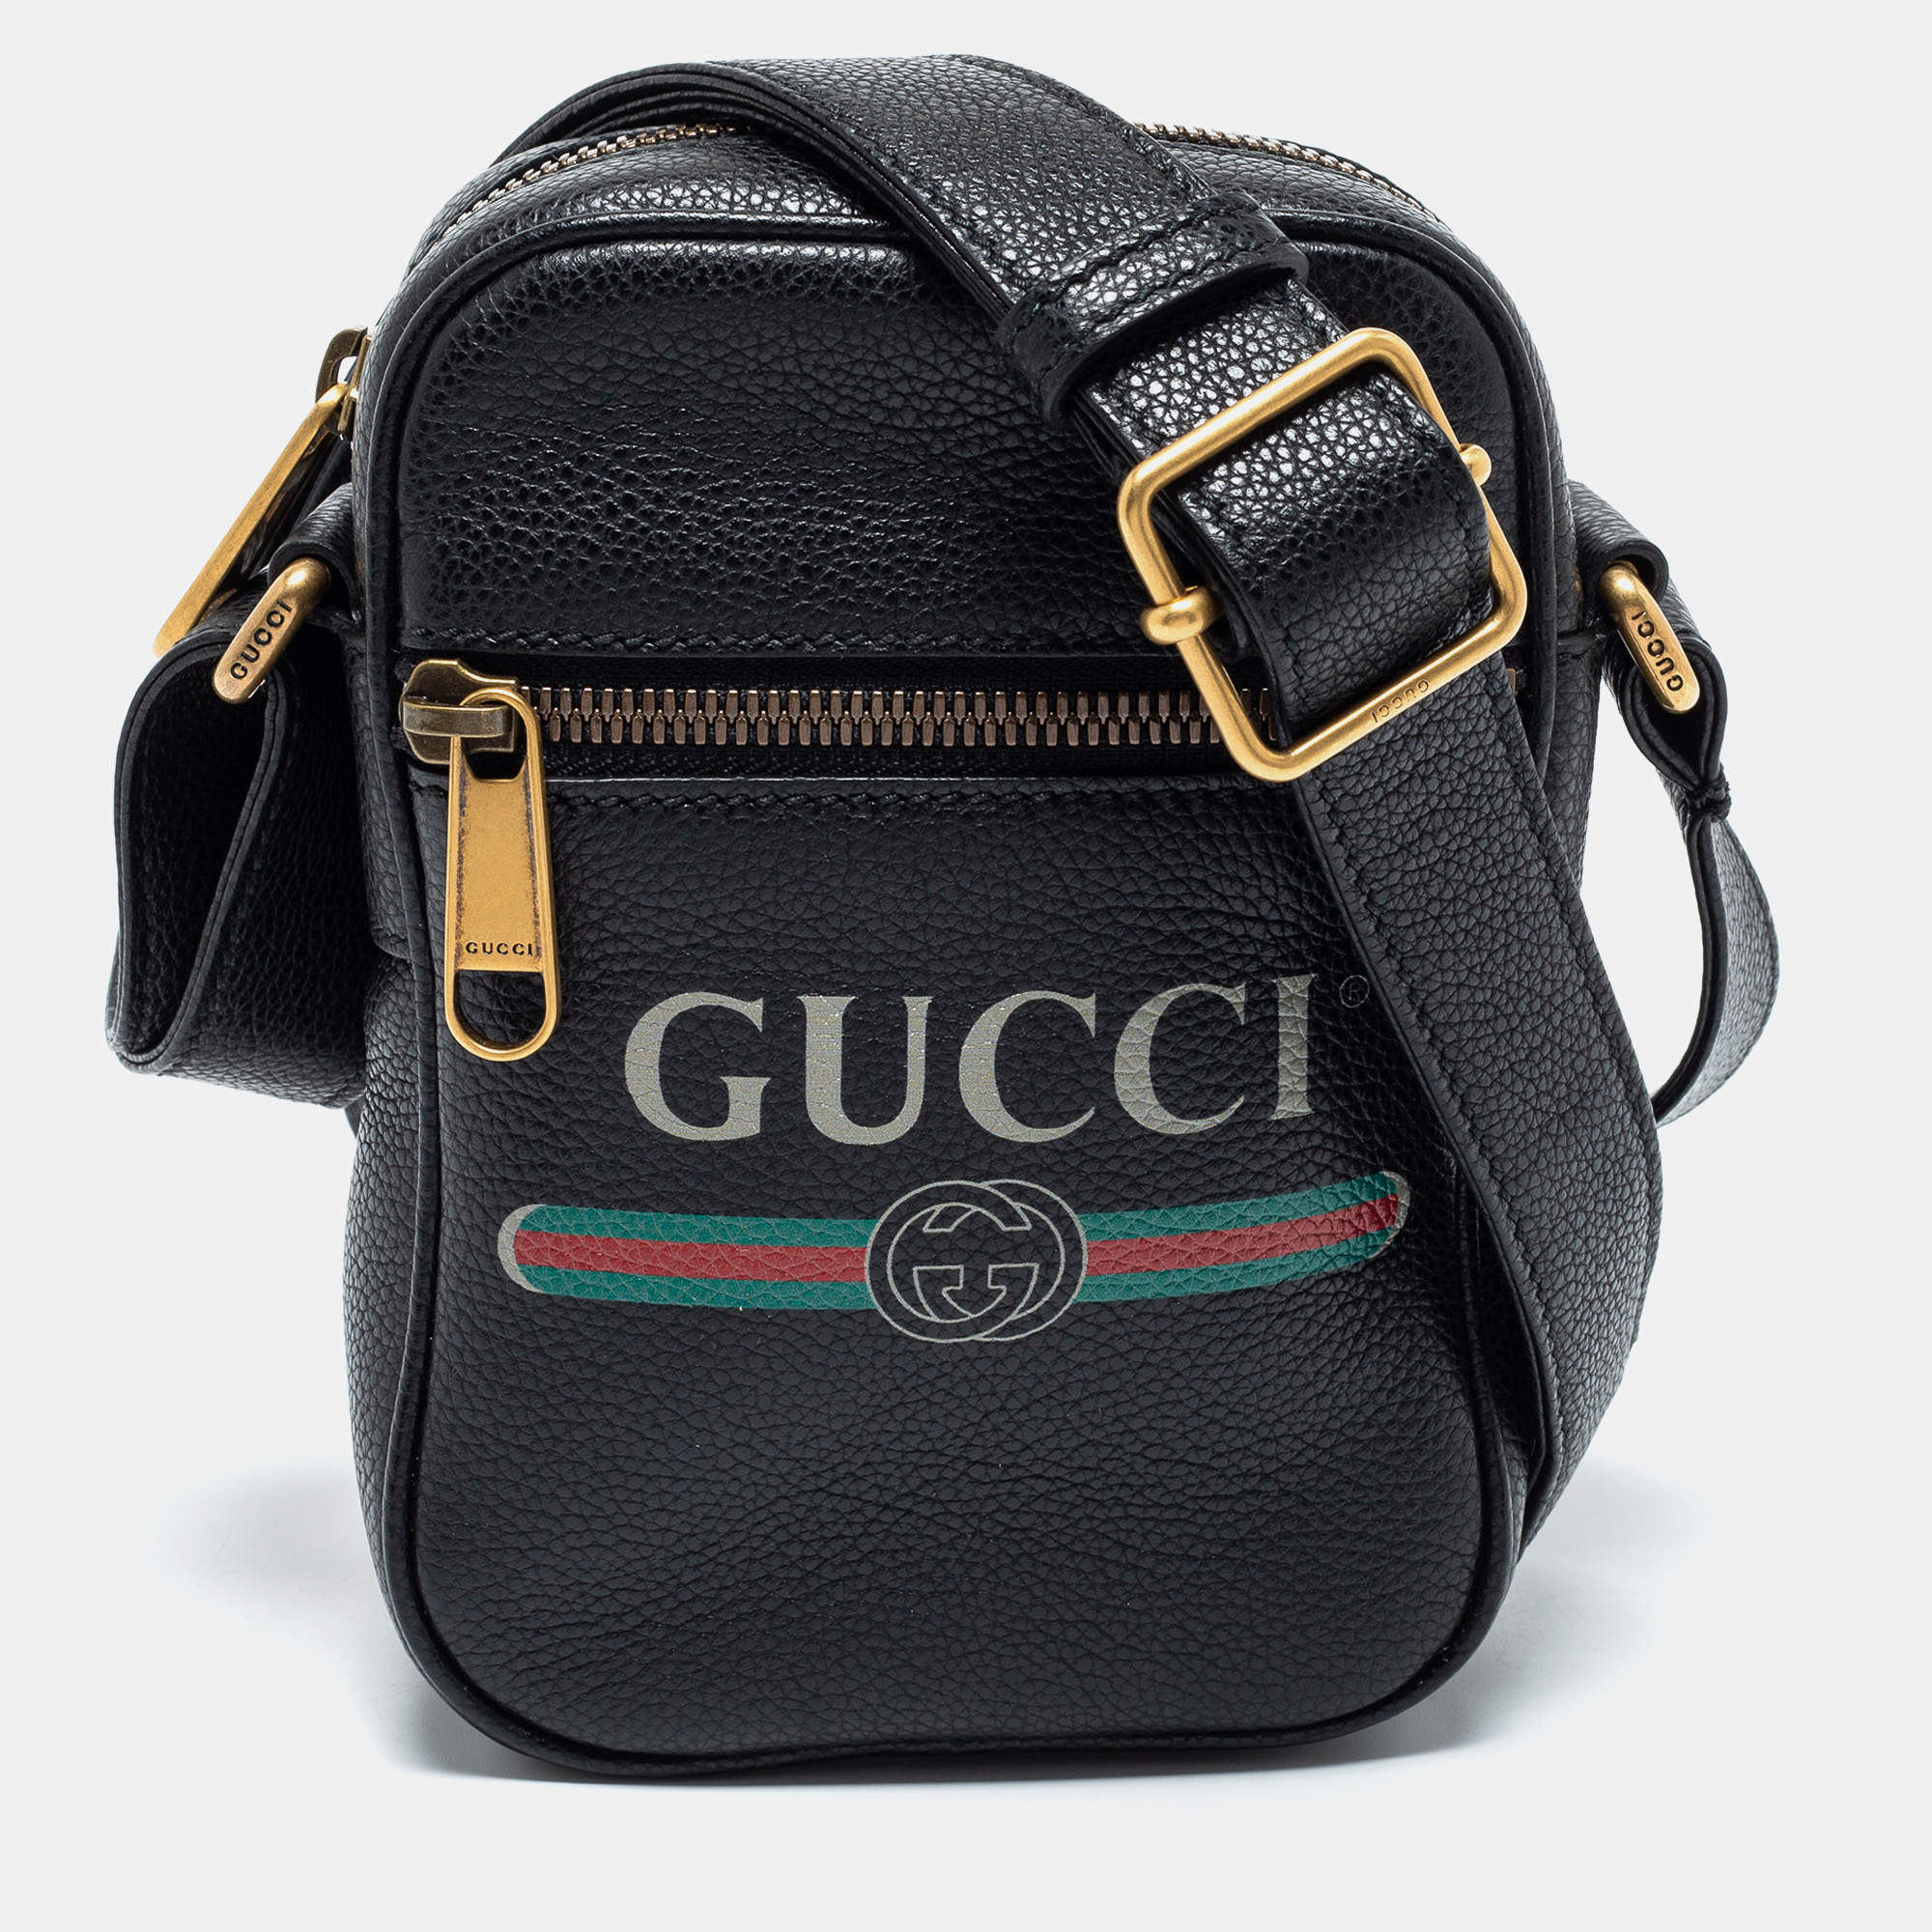 GUCCI Waist Pouch, Bag, Sling/Clutch Bag & Watch (further reduction)